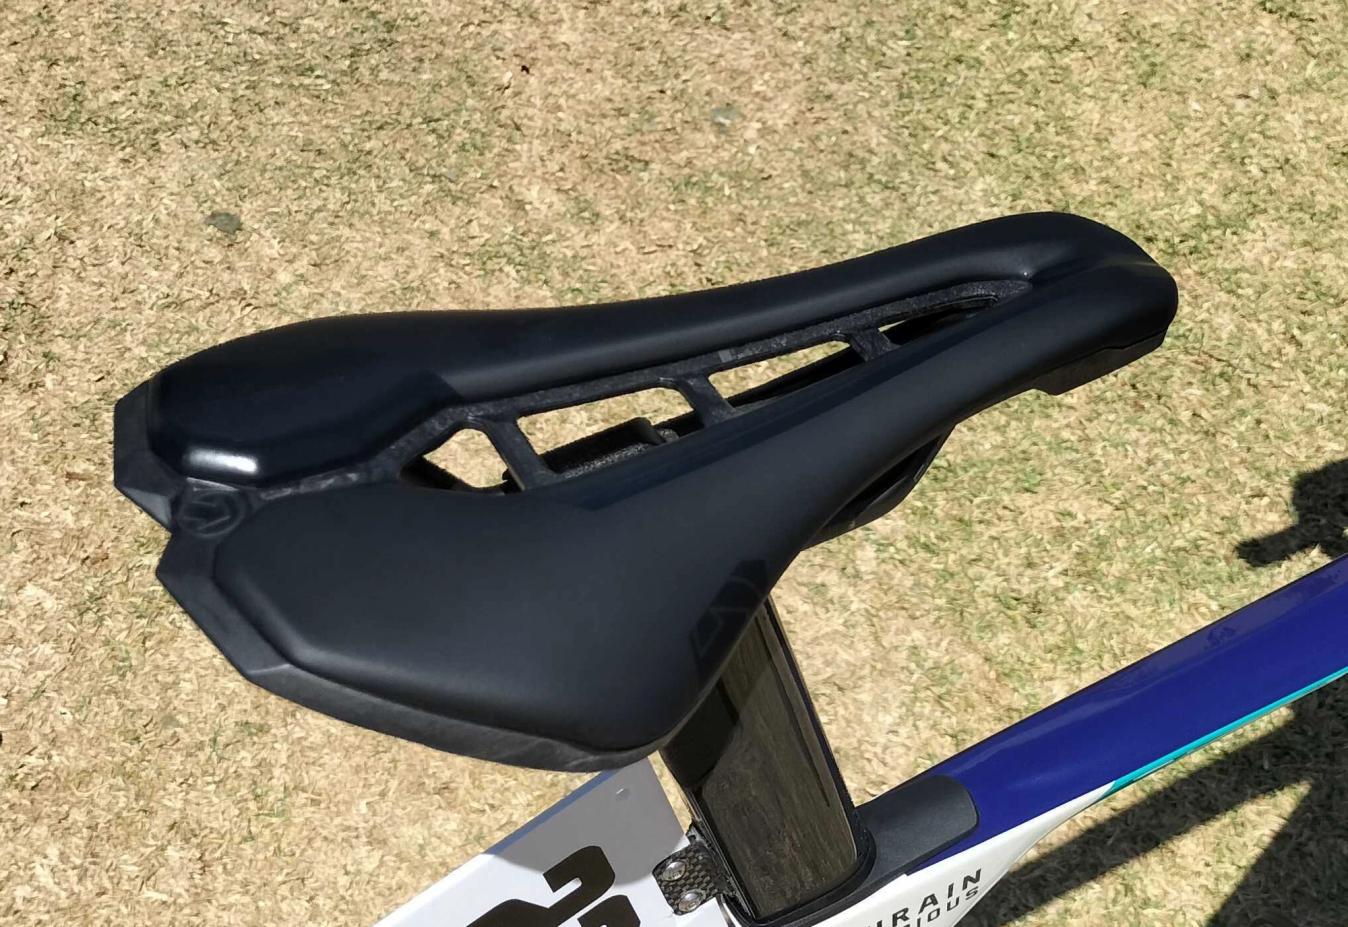 A Pro Stealth Performance saddle